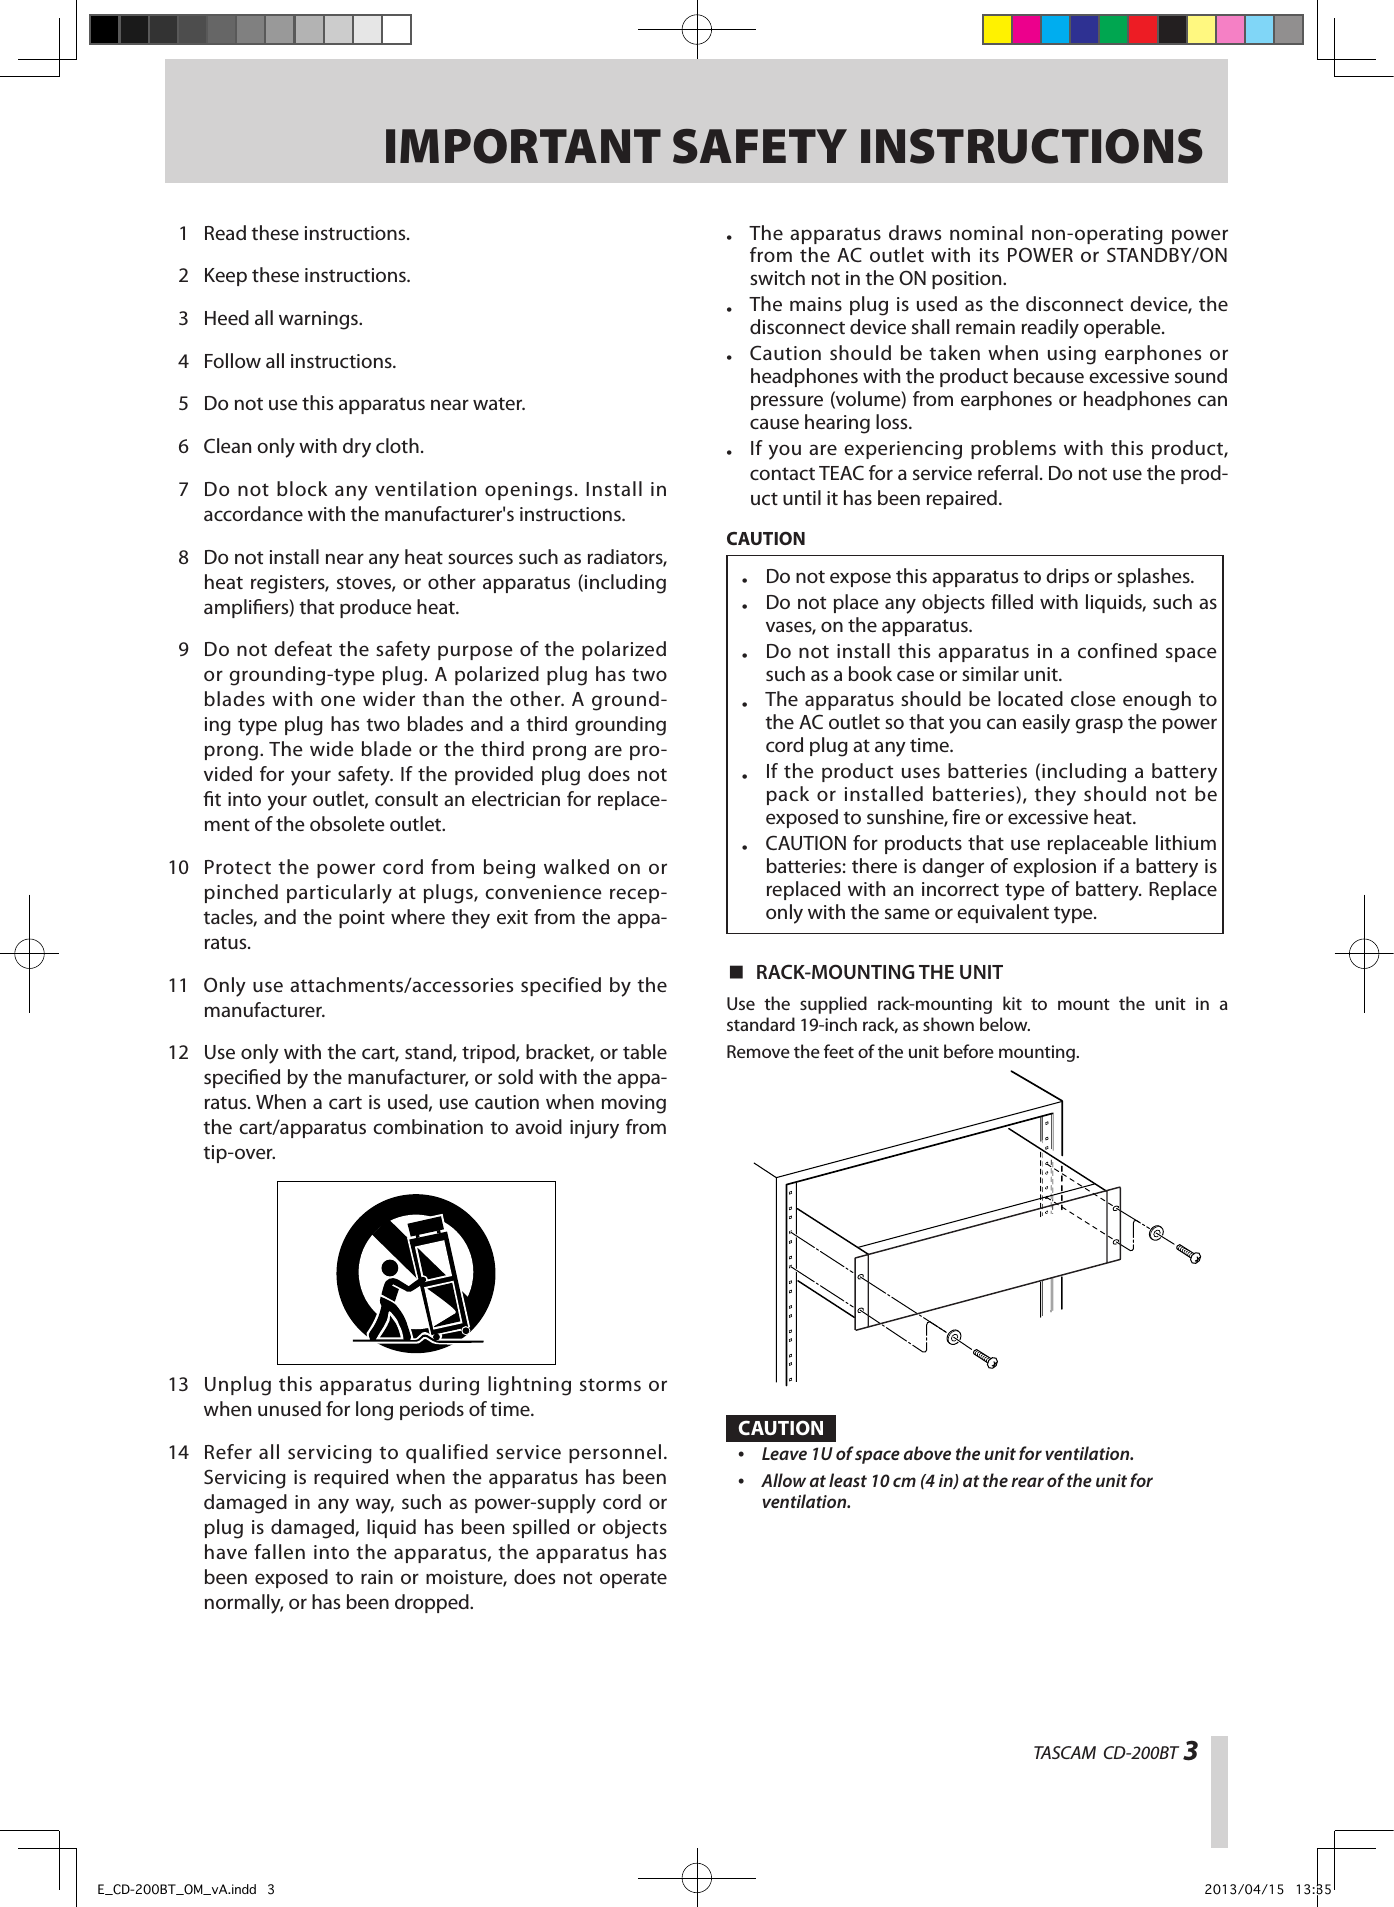 TASCAM  CD-200BT 3IMPORTANT SAFETY INSTRUCTIONS•  The apparatus draws nominal non-operating power from the AC outlet with its POWER or STANDBY/ON switch not in the ON position.•  The mains plug is used as the disconnect device, the disconnect device shall remain readily operable.•  Caution should be taken when using earphones or headphones with the product because excessive sound pressure (volume) from earphones or headphones can cause hearing loss.•  If you are experiencing problems with this product, contact TEAC for a service referral. Do not use the prod-uct until it has been repaired.CAUTION•  Do not expose this apparatus to drips or splashes.•  Do not place any objects filled with liquids, such as vases, on the apparatus.•  Do not install this apparatus in a confined space such as a book case or similar unit.•  The apparatus should be located close enough to the AC outlet so that you can easily grasp the power cord plug at any time.•  If the product uses batteries (including a battery pack or installed batteries), they should not be exposed to sunshine, fire or excessive heat.•  CAUTION for products that use replaceable lithium batteries: there is danger of explosion if a battery is replaced with an incorrect type of battery. Replace only with the same or equivalent type. 8RACK-MOUNTING THE UNITUse the supplied rack-mounting kit to mount the unit in a standard 19-inch rack, as shown below.Remove the feet of the unit before mounting.CAUTION•  Leave 1U of space above the unit for ventilation.•  Allow at least 10 cm (4 in) at the rear of the unit for ventilation. 1  Read these instructions.  2  Keep these instructions.  3  Heed all warnings.  4  Follow all instructions.  5  Do not use this apparatus near water.  6  Clean only with dry cloth.  7  Do not block any ventilation openings. Install in accordance with the manufacturer&apos;s instructions.  8  Do not install near any heat sources such as radiators, heat registers, stoves, or other apparatus (including ampliers) that produce heat.  9  Do not defeat the safety purpose of the polarized or grounding-type plug. A polarized plug has two blades with one wider than the other. A ground-ing type plug has two blades and a third grounding prong. The wide blade or the third prong are pro-vided for your safety. If the provided plug does not t into your outlet, consult an electrician for replace-ment of the obsolete outlet. 10  Protect the power cord from being walked on or pinched particularly at plugs, convenience recep-tacles, and the point where they exit from the appa-ratus. 11  Only use attachments/accessories specified by the manufacturer. 12  Use only with the cart, stand, tripod, bracket, or table specied by the manufacturer, or sold with the appa-ratus. When a cart is used, use caution when moving the cart/apparatus combination to avoid injury from tip-over. 13  Unplug this apparatus during lightning storms or when unused for long periods of time. 14  Refer all servicing to qualified service personnel. Servicing is required when the apparatus has been damaged in any way, such as power-supply cord or plug is damaged, liquid has been spilled or objects have fallen into the apparatus, the apparatus has been exposed to rain or moisture, does not operate normally, or has been dropped.E_CD-200BT_OM_vA.indd   3 2013/04/15   13:35